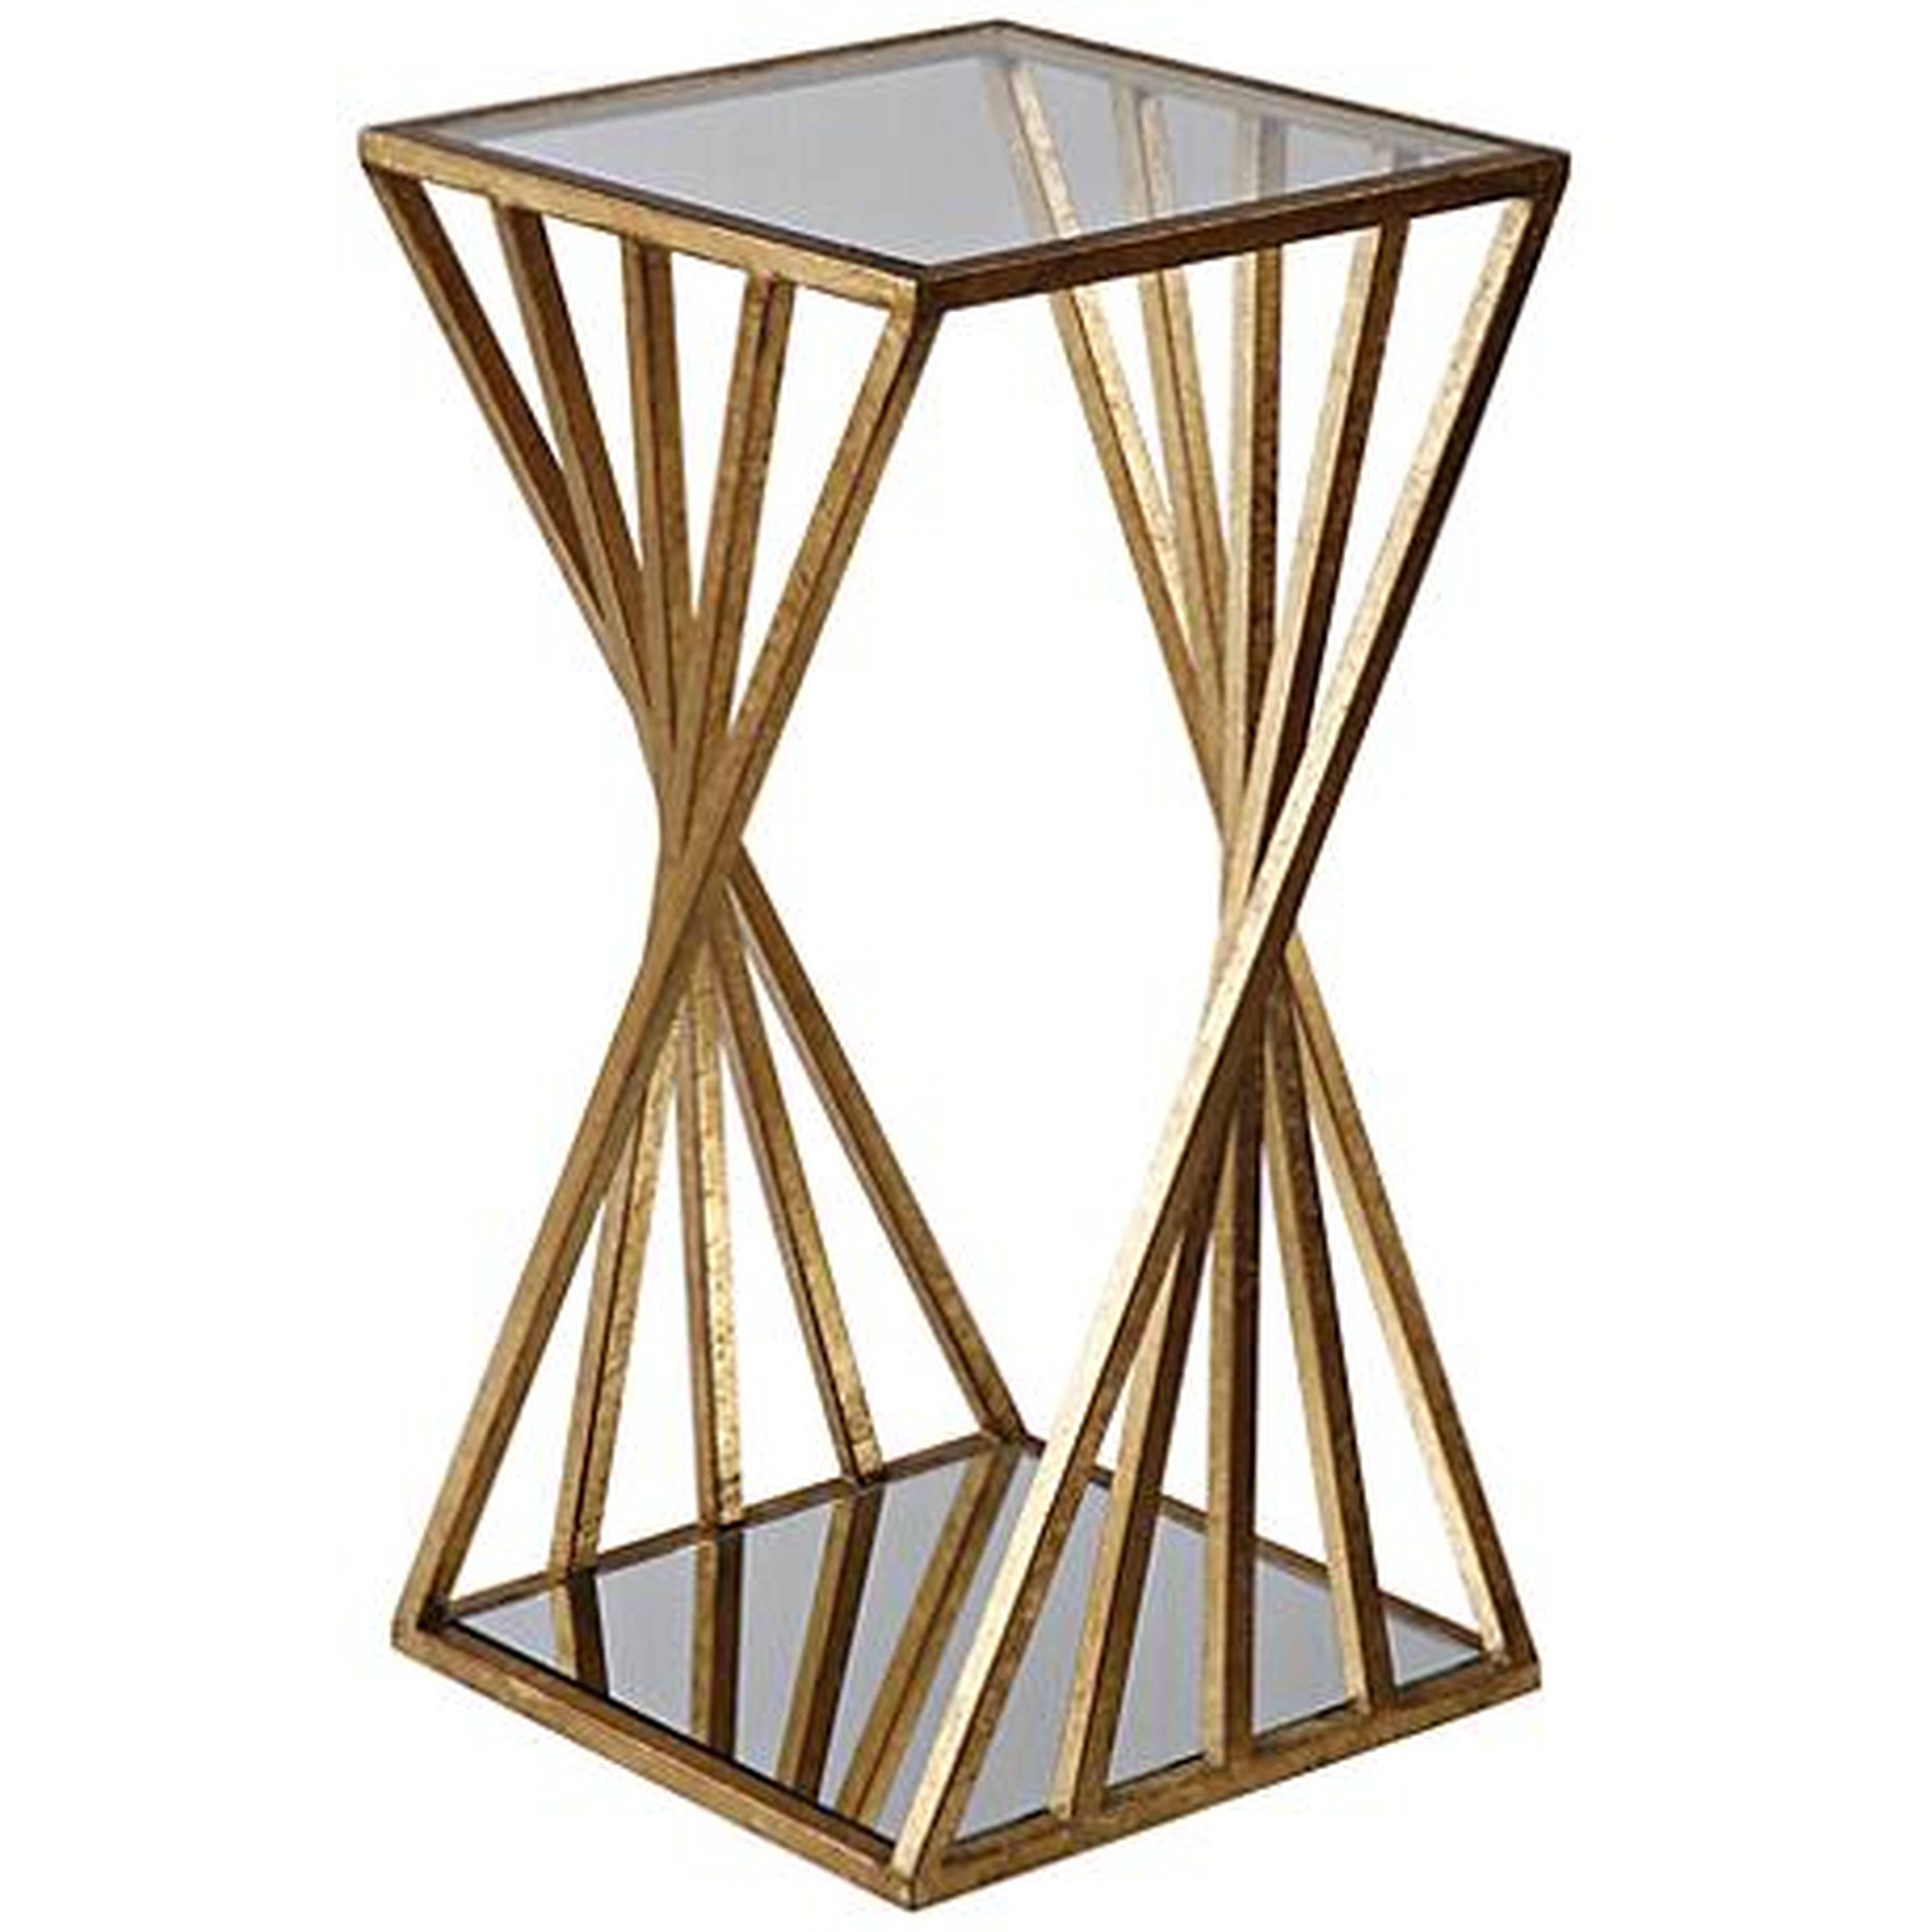 Hudsonhill Foundry Janina Glass Top Gold Leaf Accent Table clear - Hudsonhill Foundry